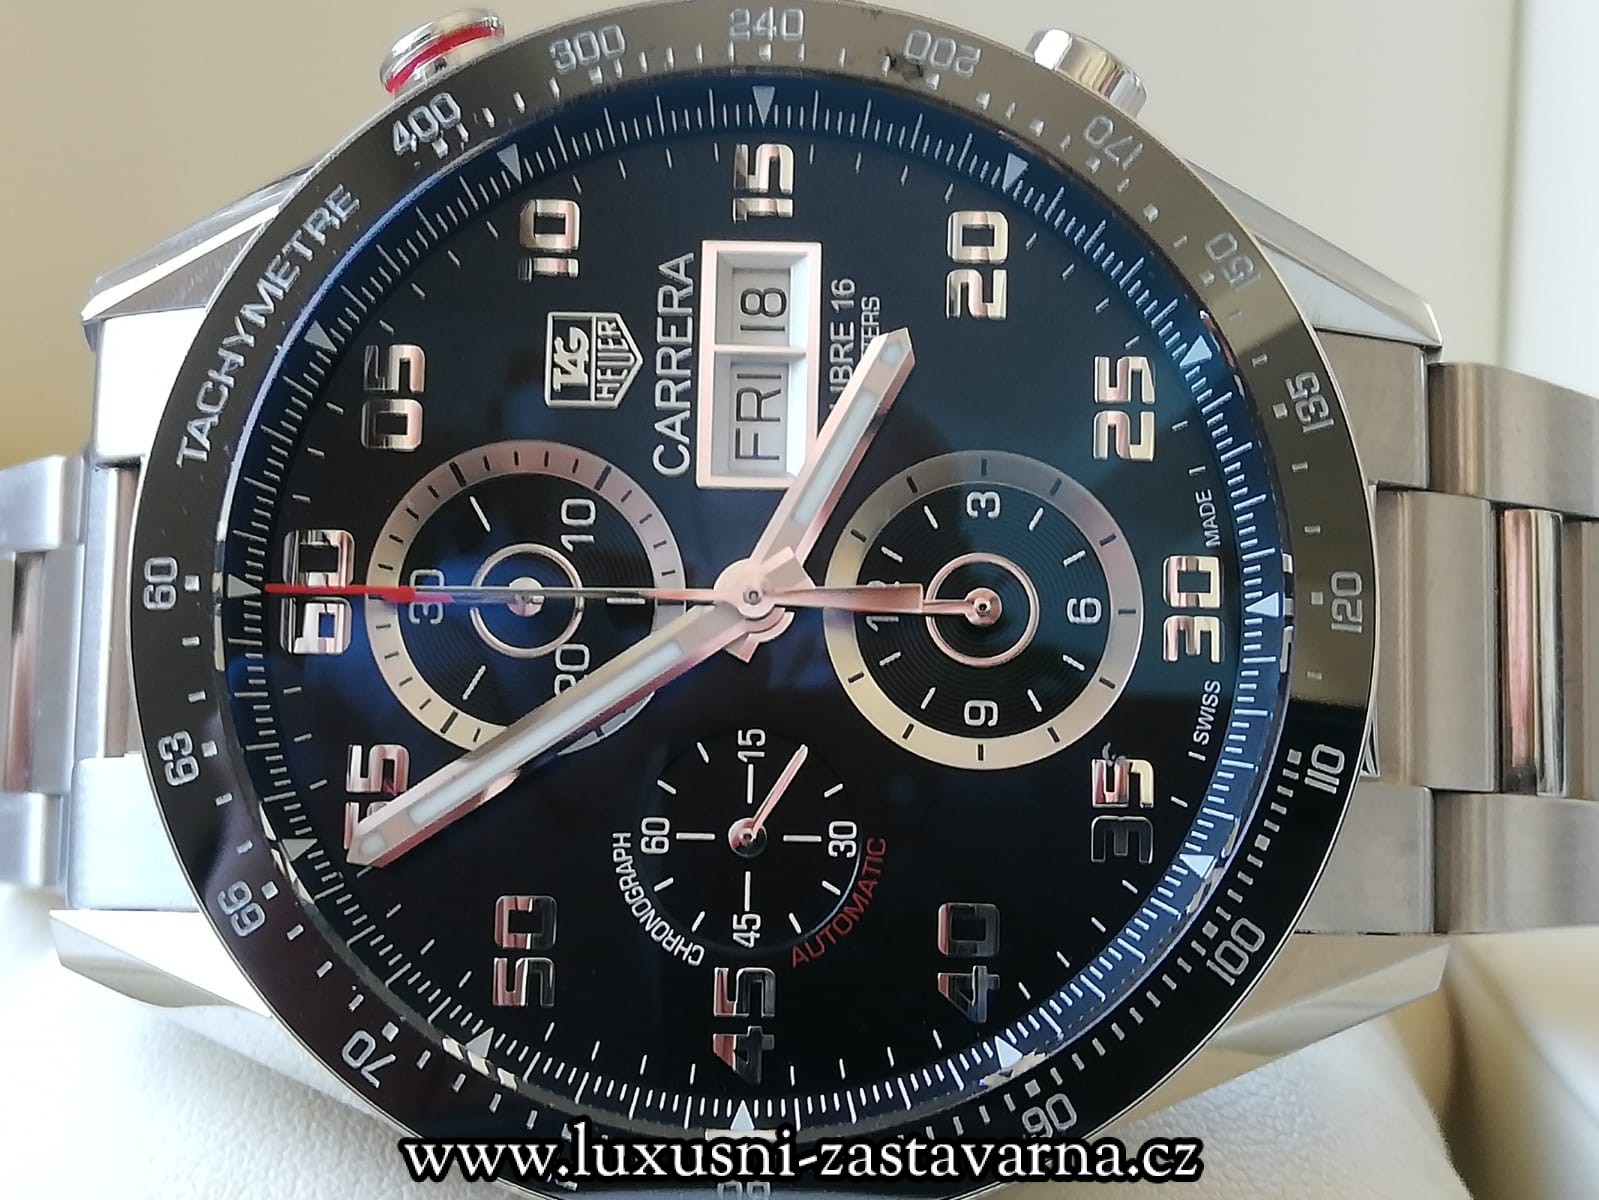 Tag_Heuer_Carrera_Day-Date_43mm_013